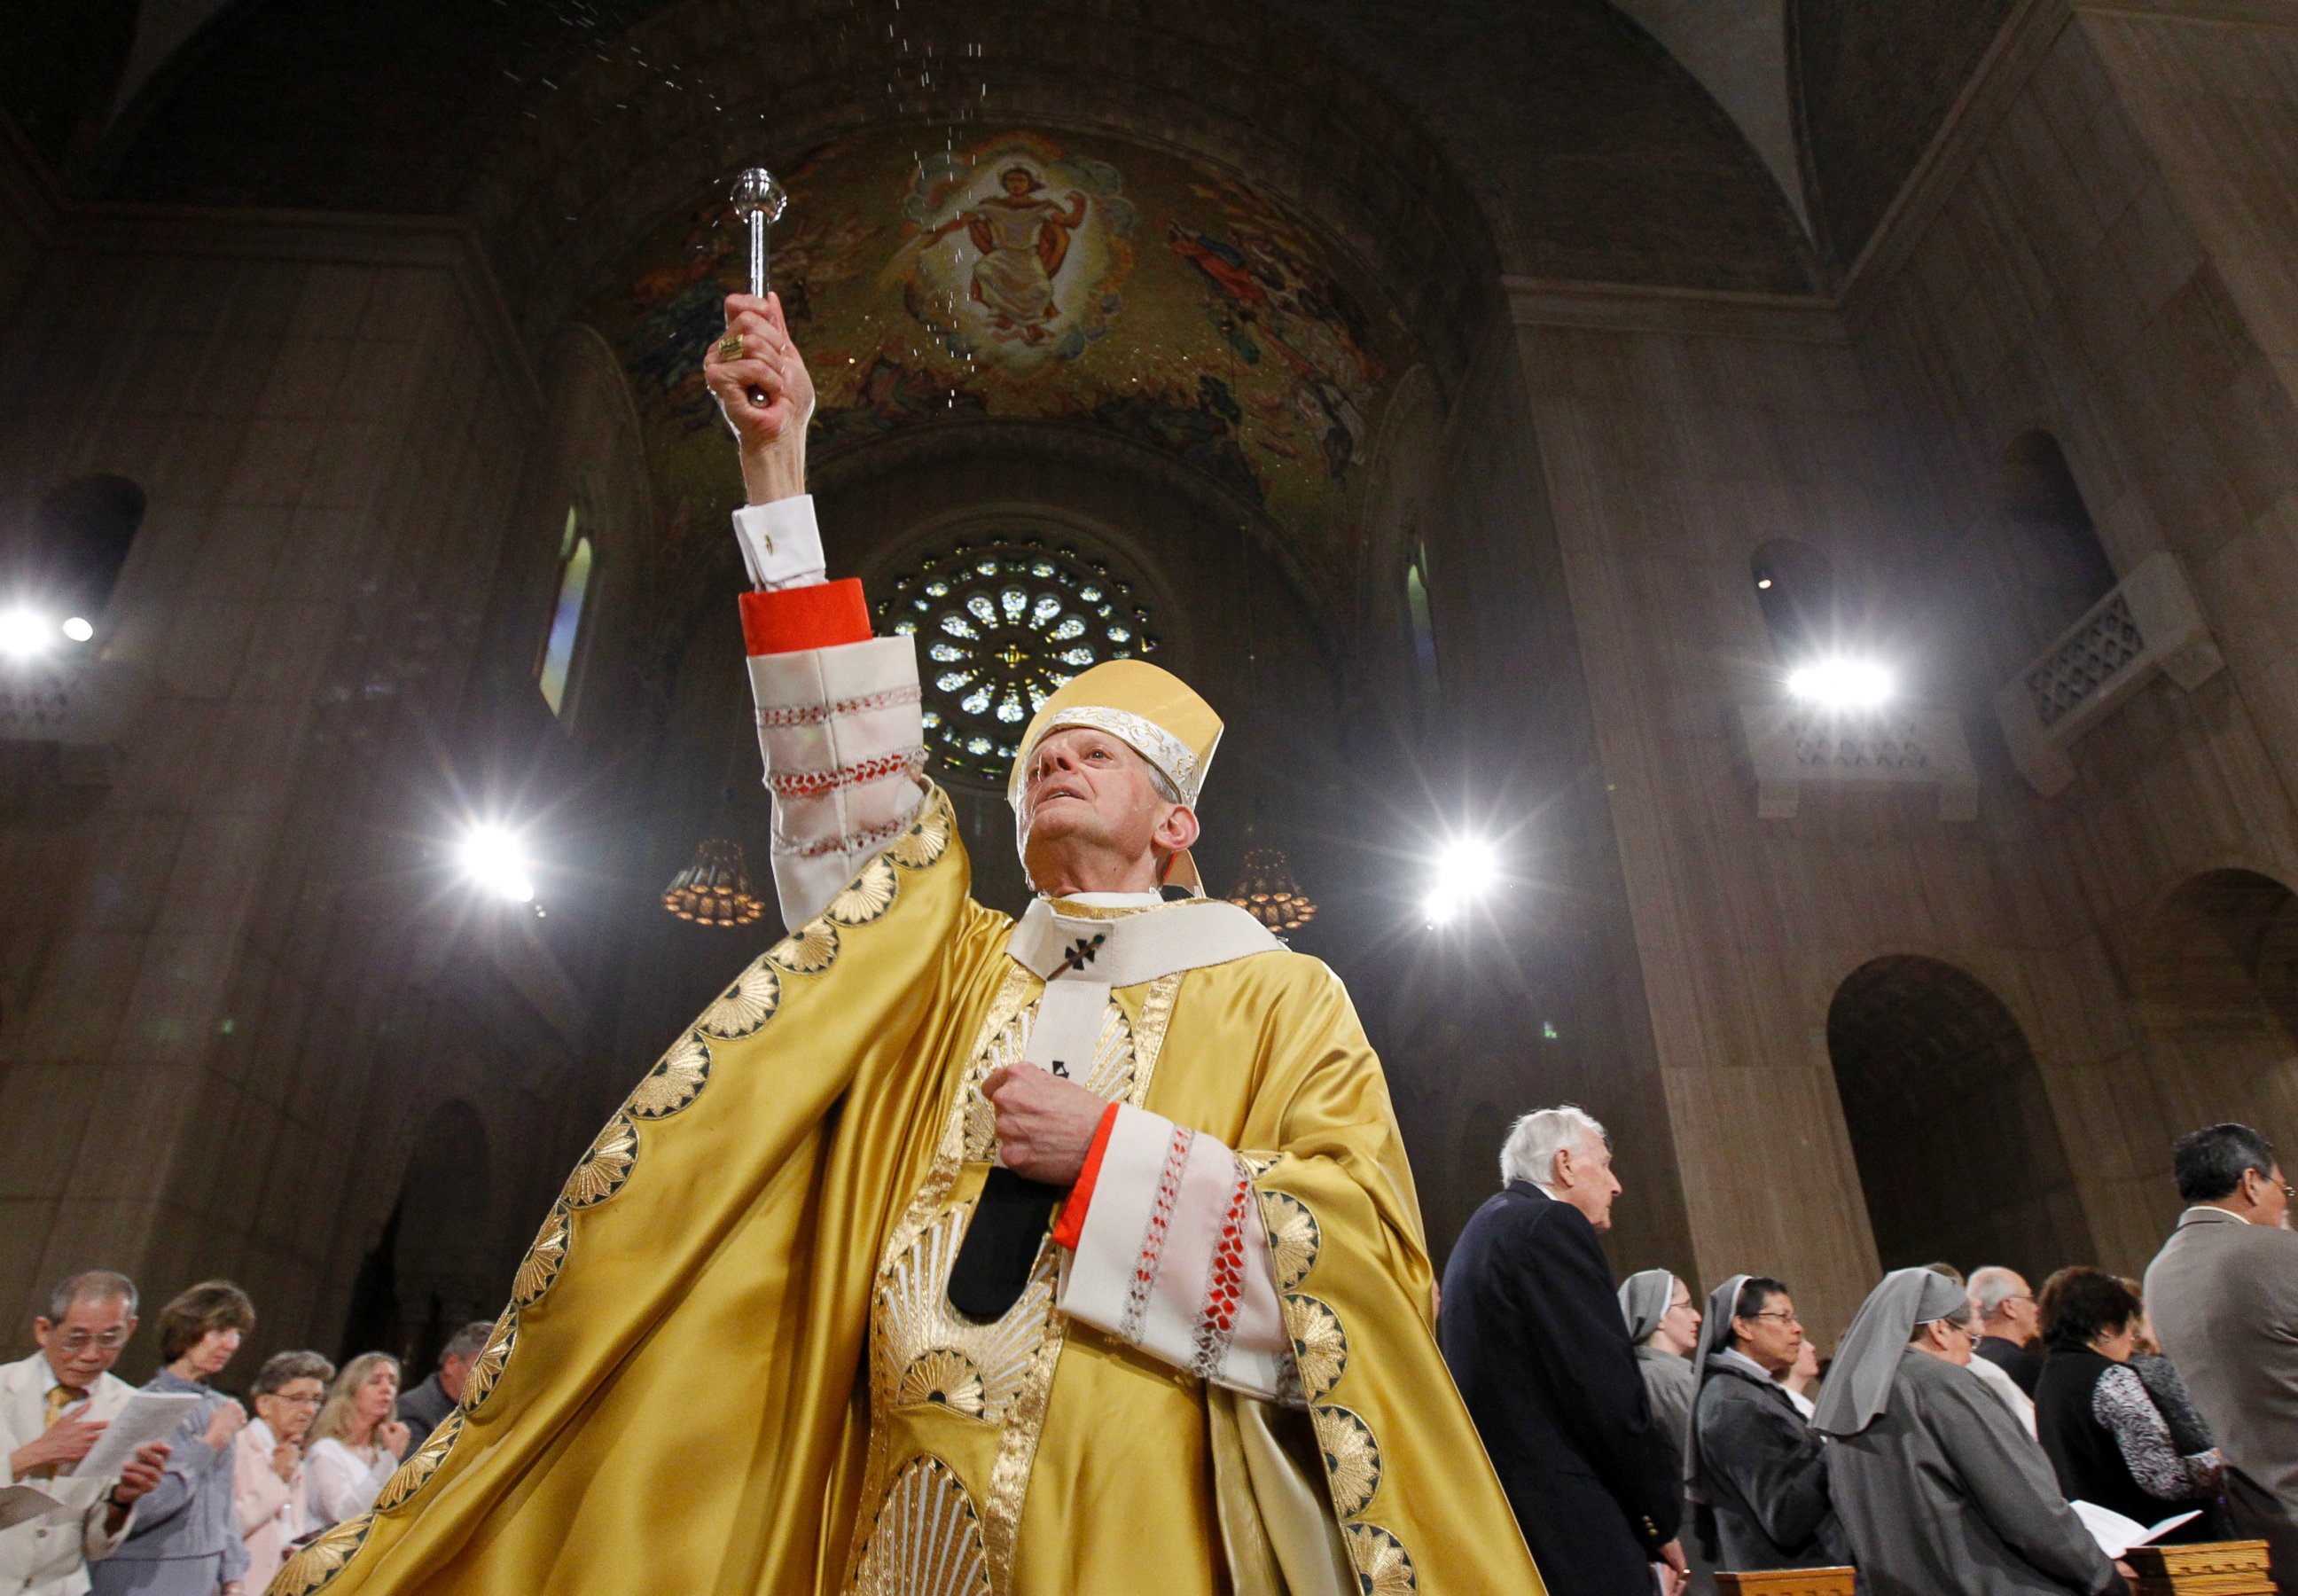 In this Sunday, April 24, 2011 file photo, Cardinal Donald Wuerl, Archbishop of Washington, sprinkles Holy Water during Easter Mass at the Basilica of the National Shrine of the Immaculate Conception Roman Catholic Church in Washington. 